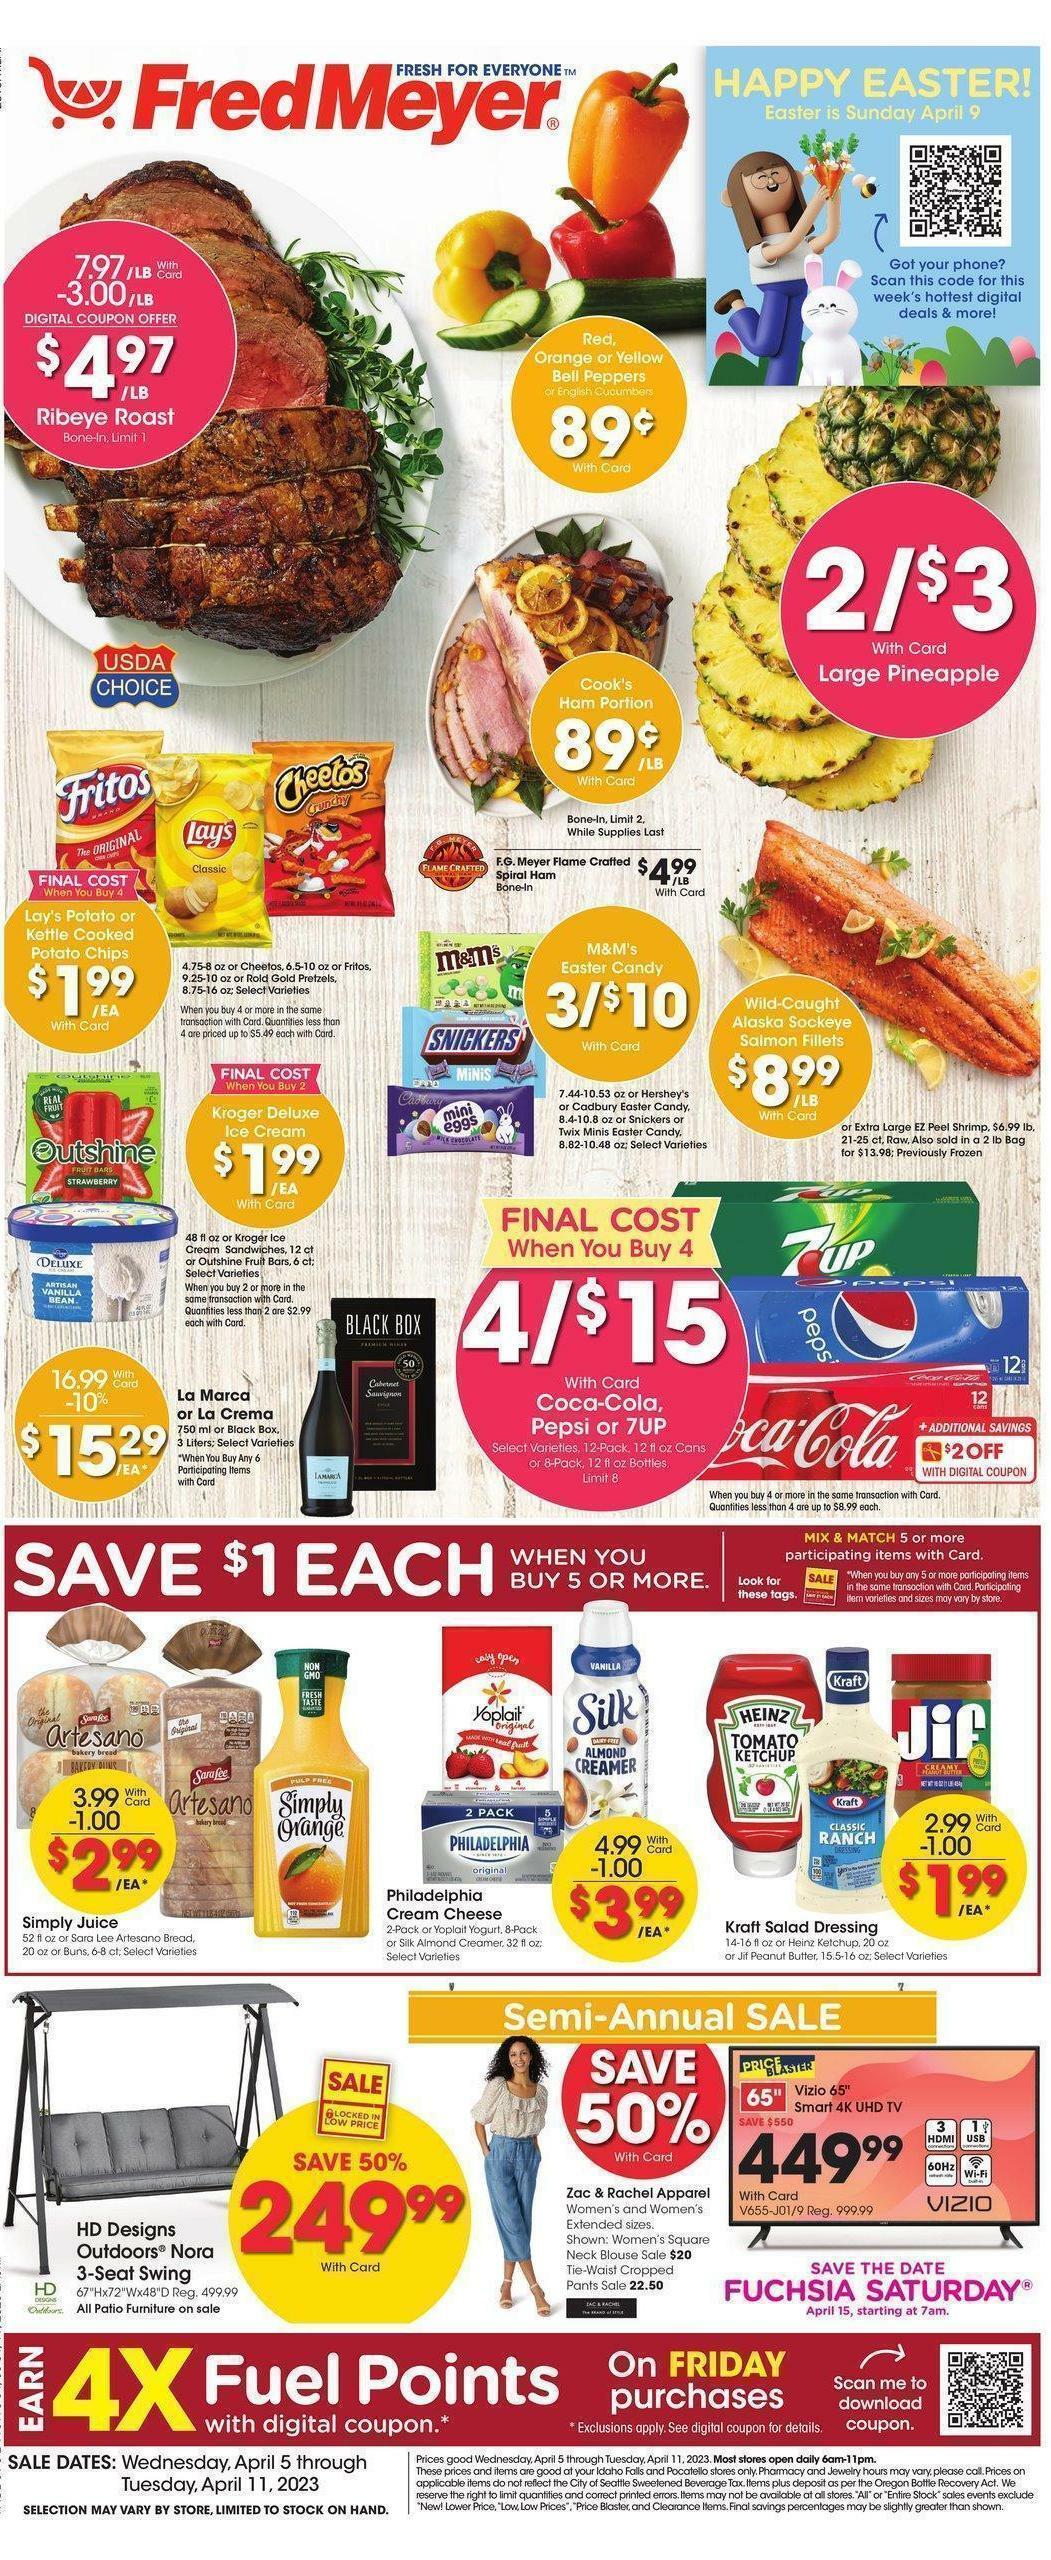 Fred Meyer Weekly Ad & Specials from April 5